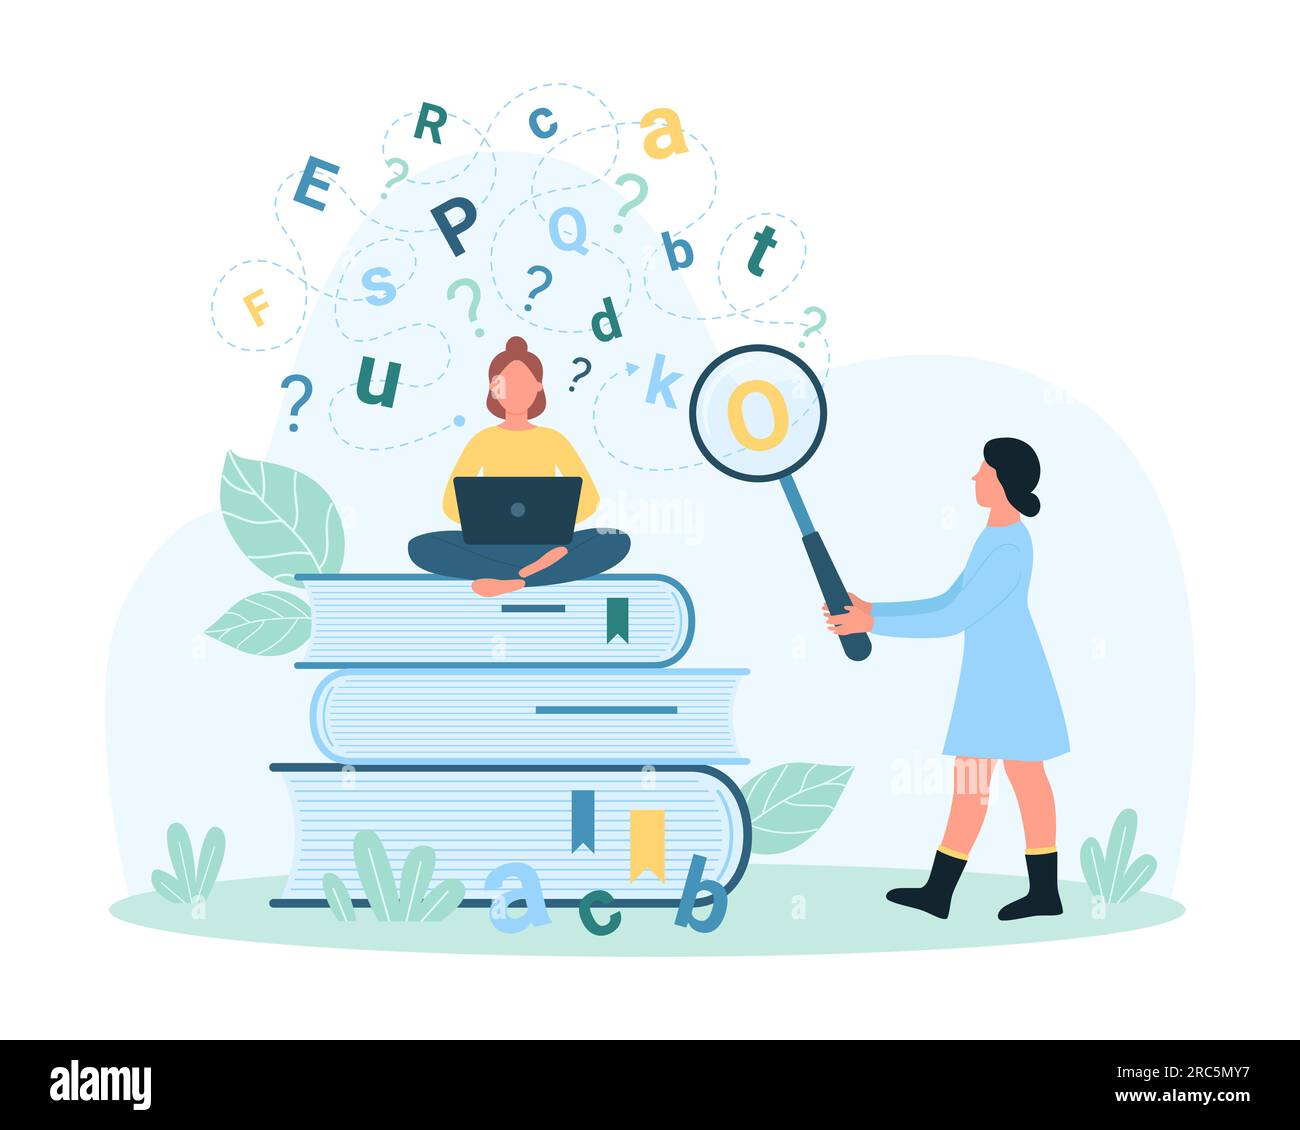 Dyslexia, disability disorder vector illustration. Cartoon tiny people study near stacks of big books, help to solve learning problem, look at letters in chaos of cloud through magnifying glass Stock Vector